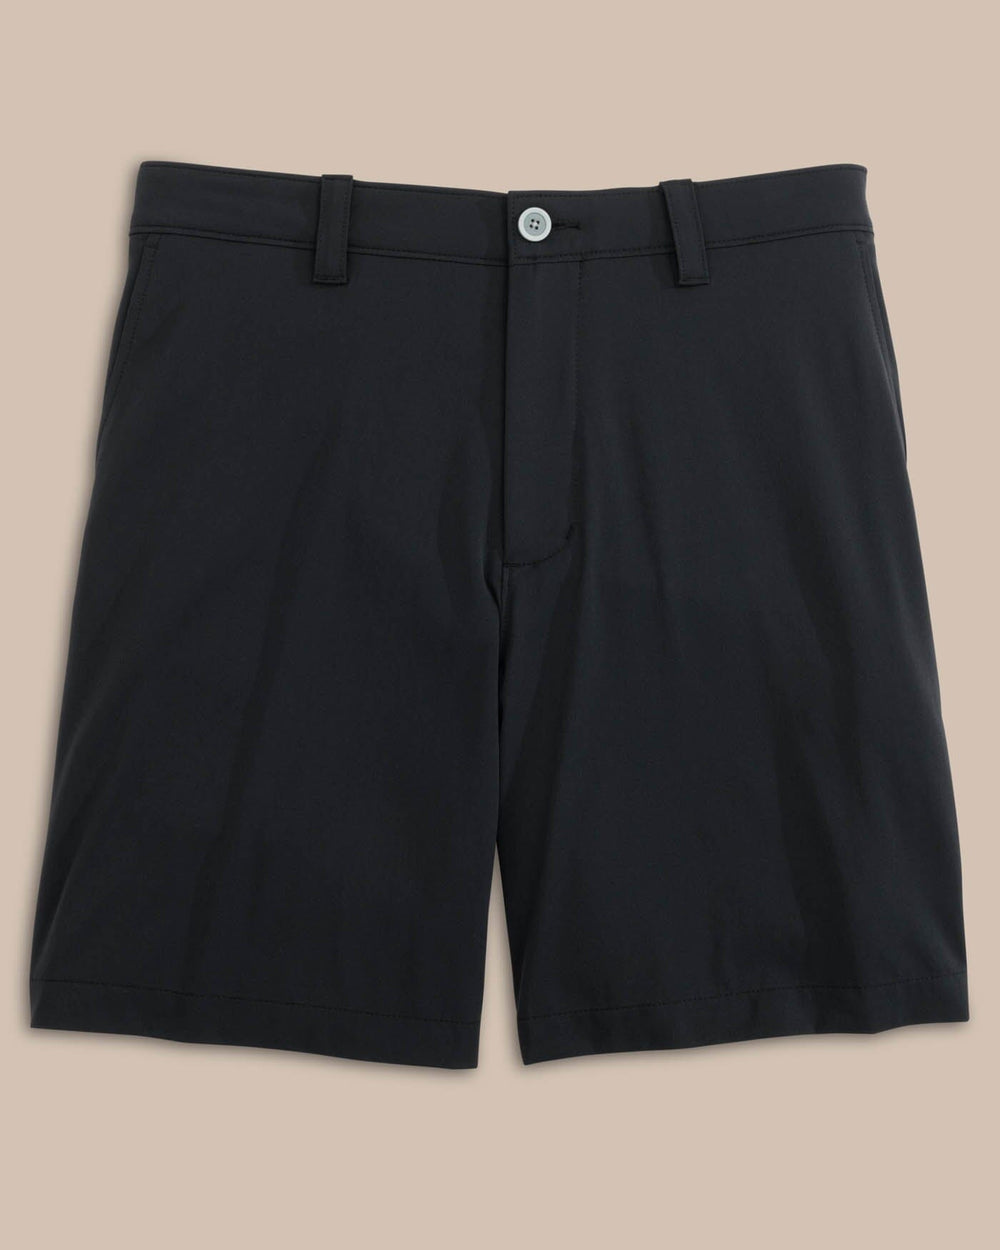 The front view of the Southern Tide brrr die 8 Performance Short by Southern Tide - Caviar Black